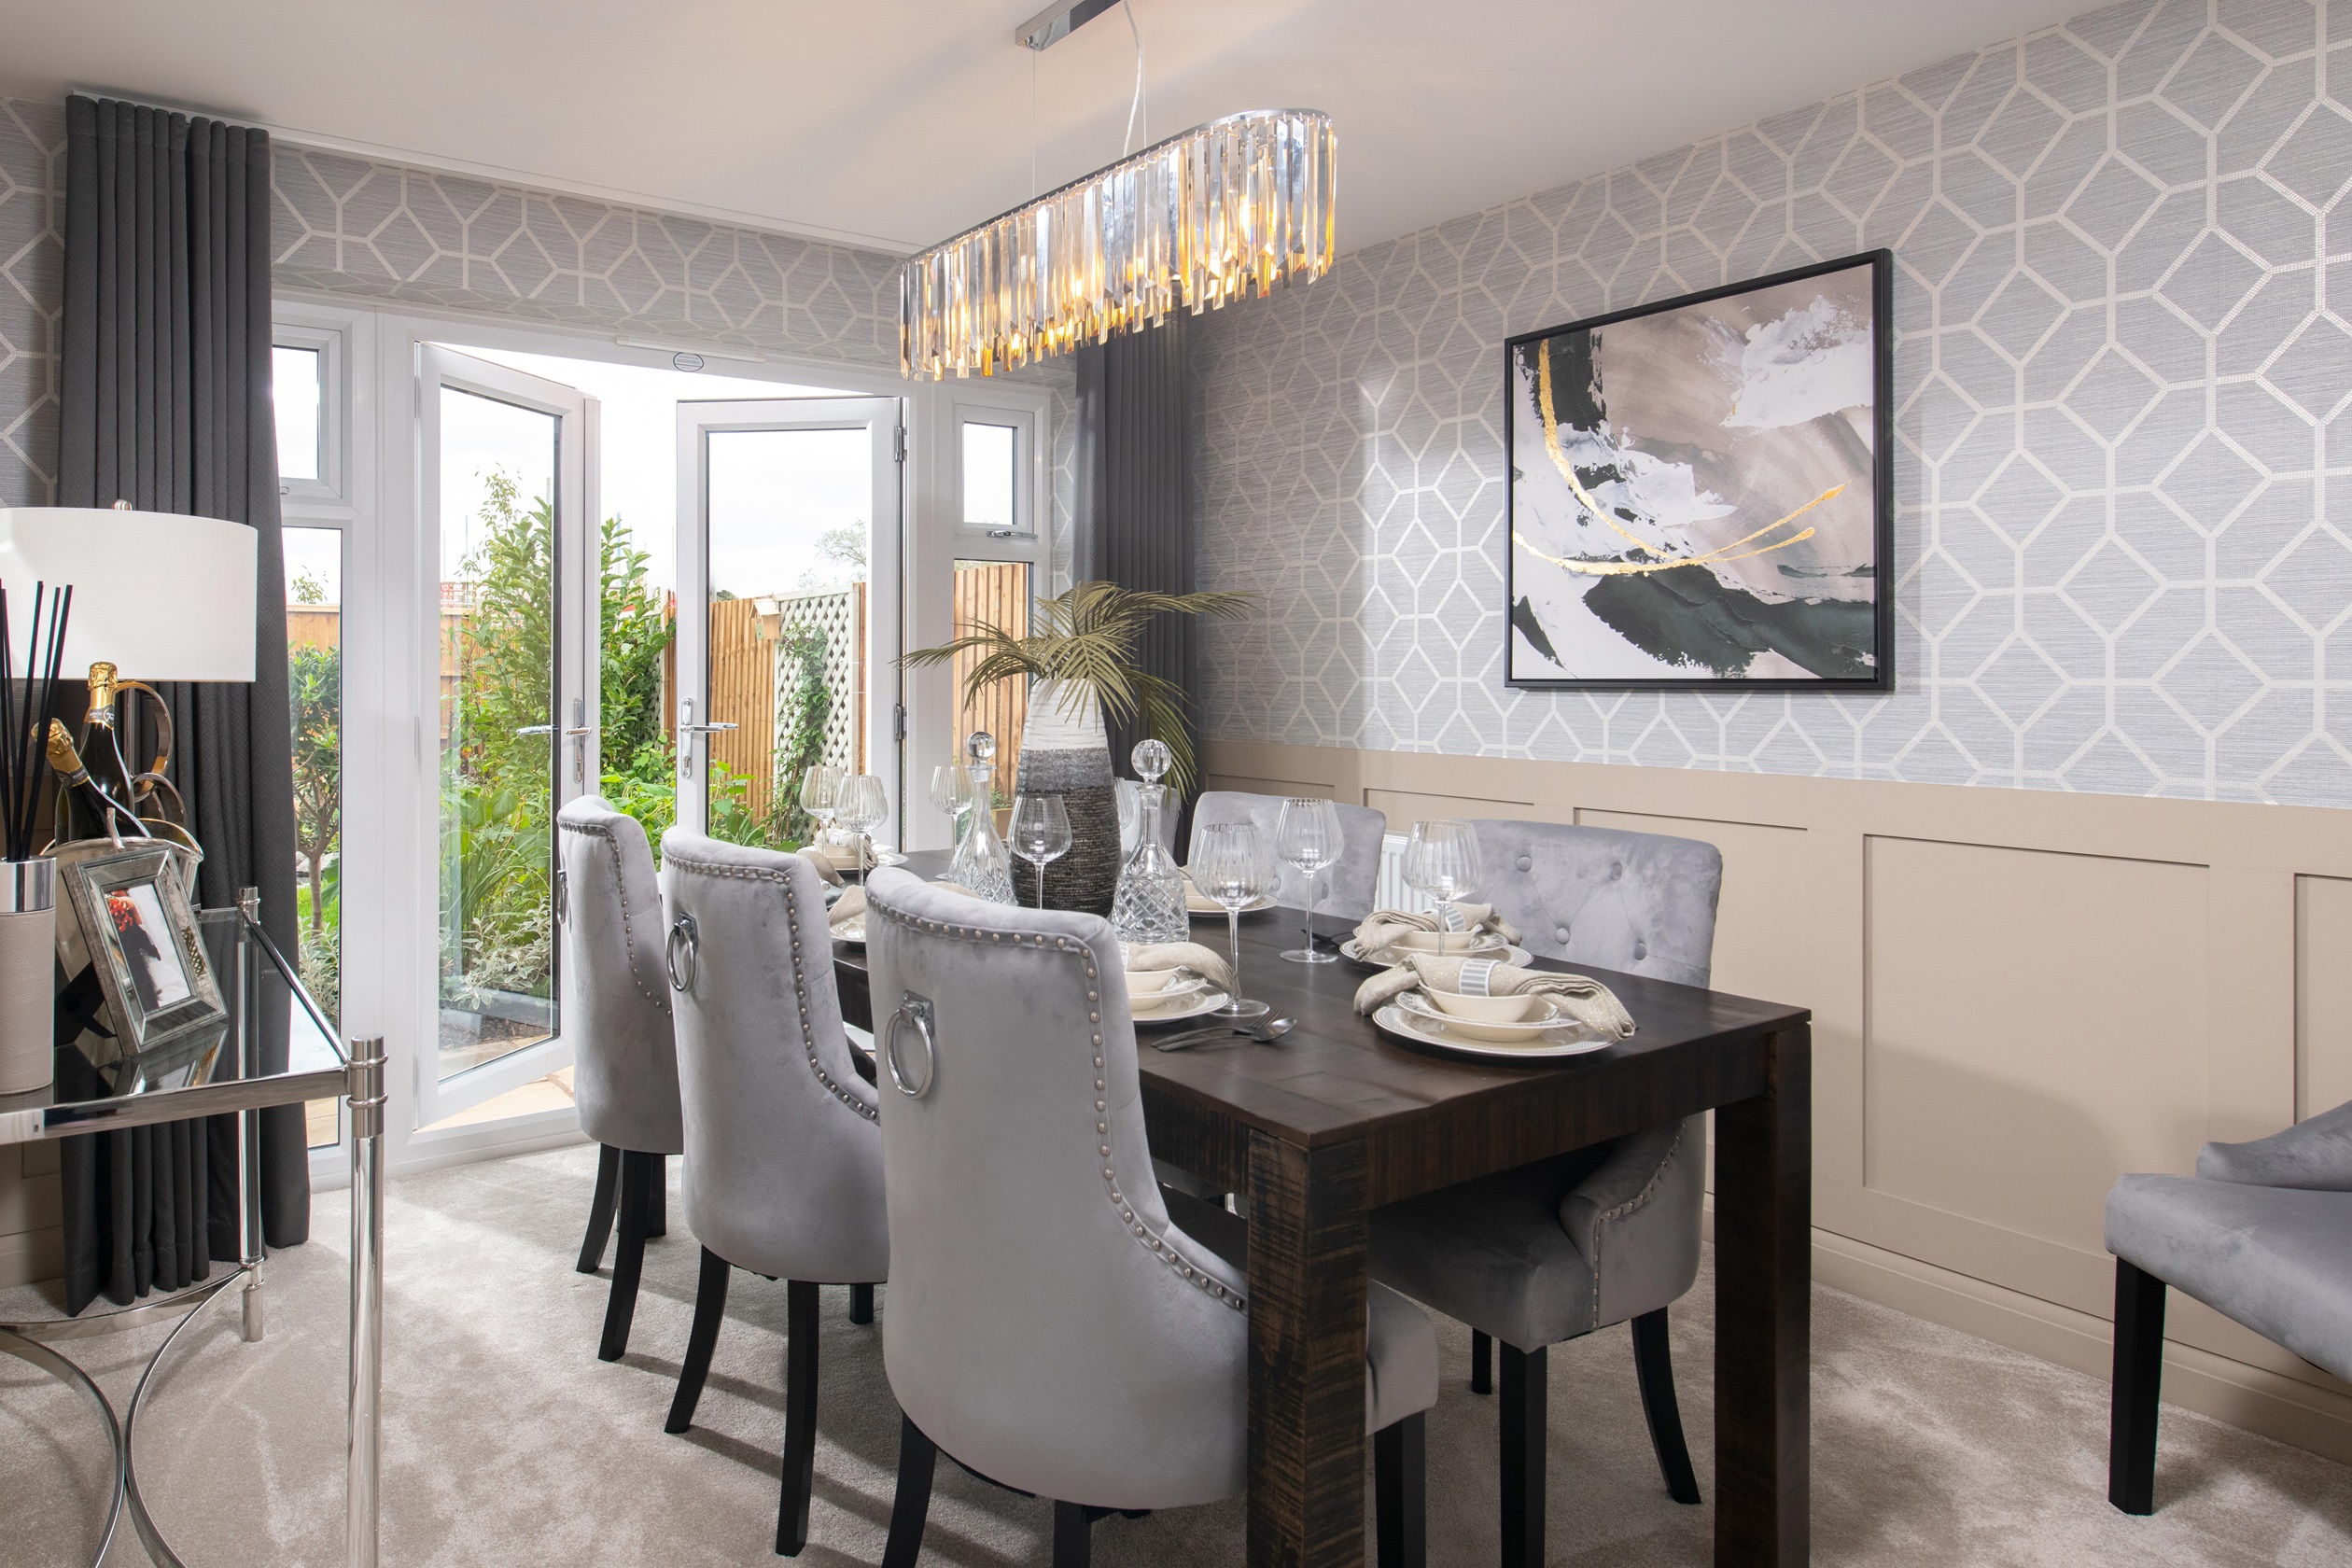 Property 3 of 10. The Hawthorns Chelworth Dining Room